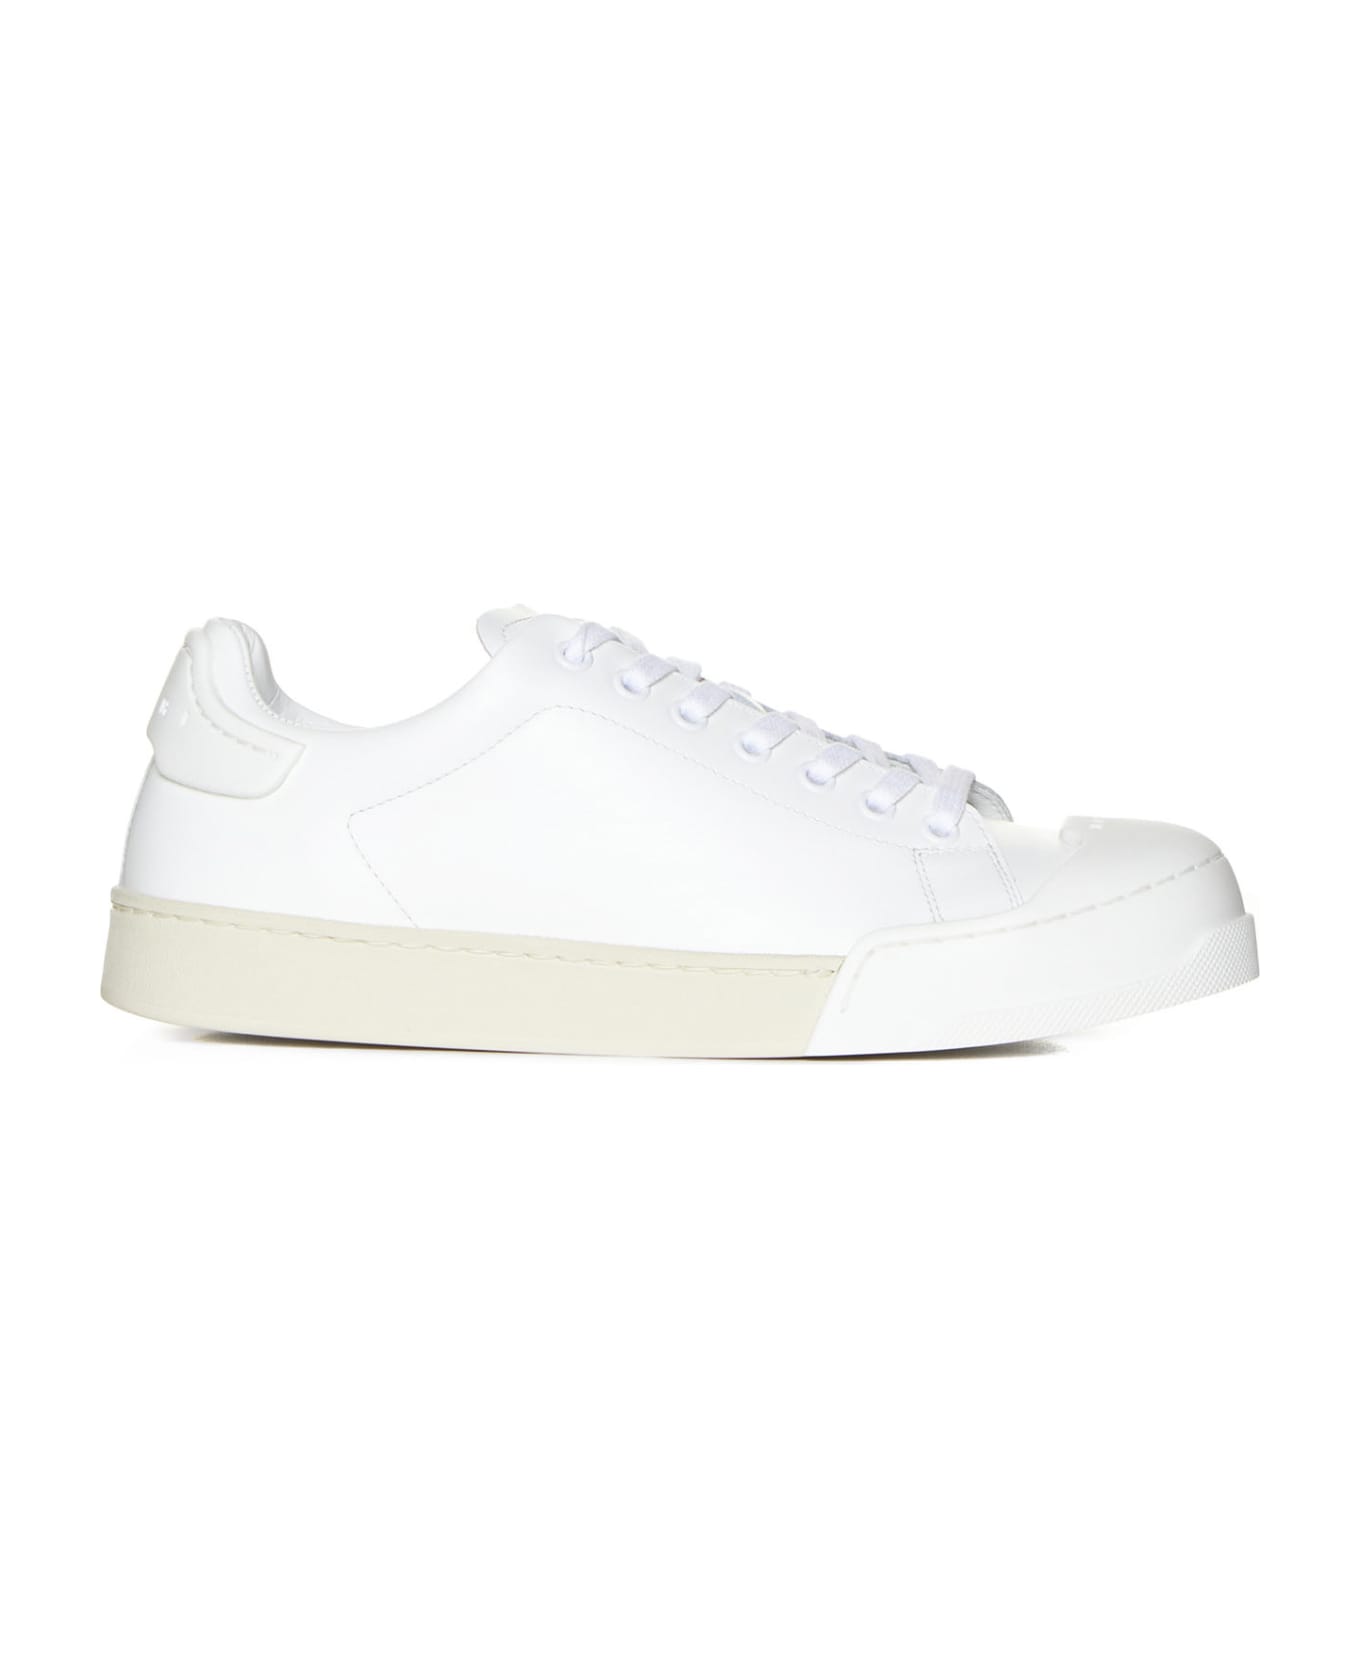 Marni Sneakers - Lily white/lily white スニーカー